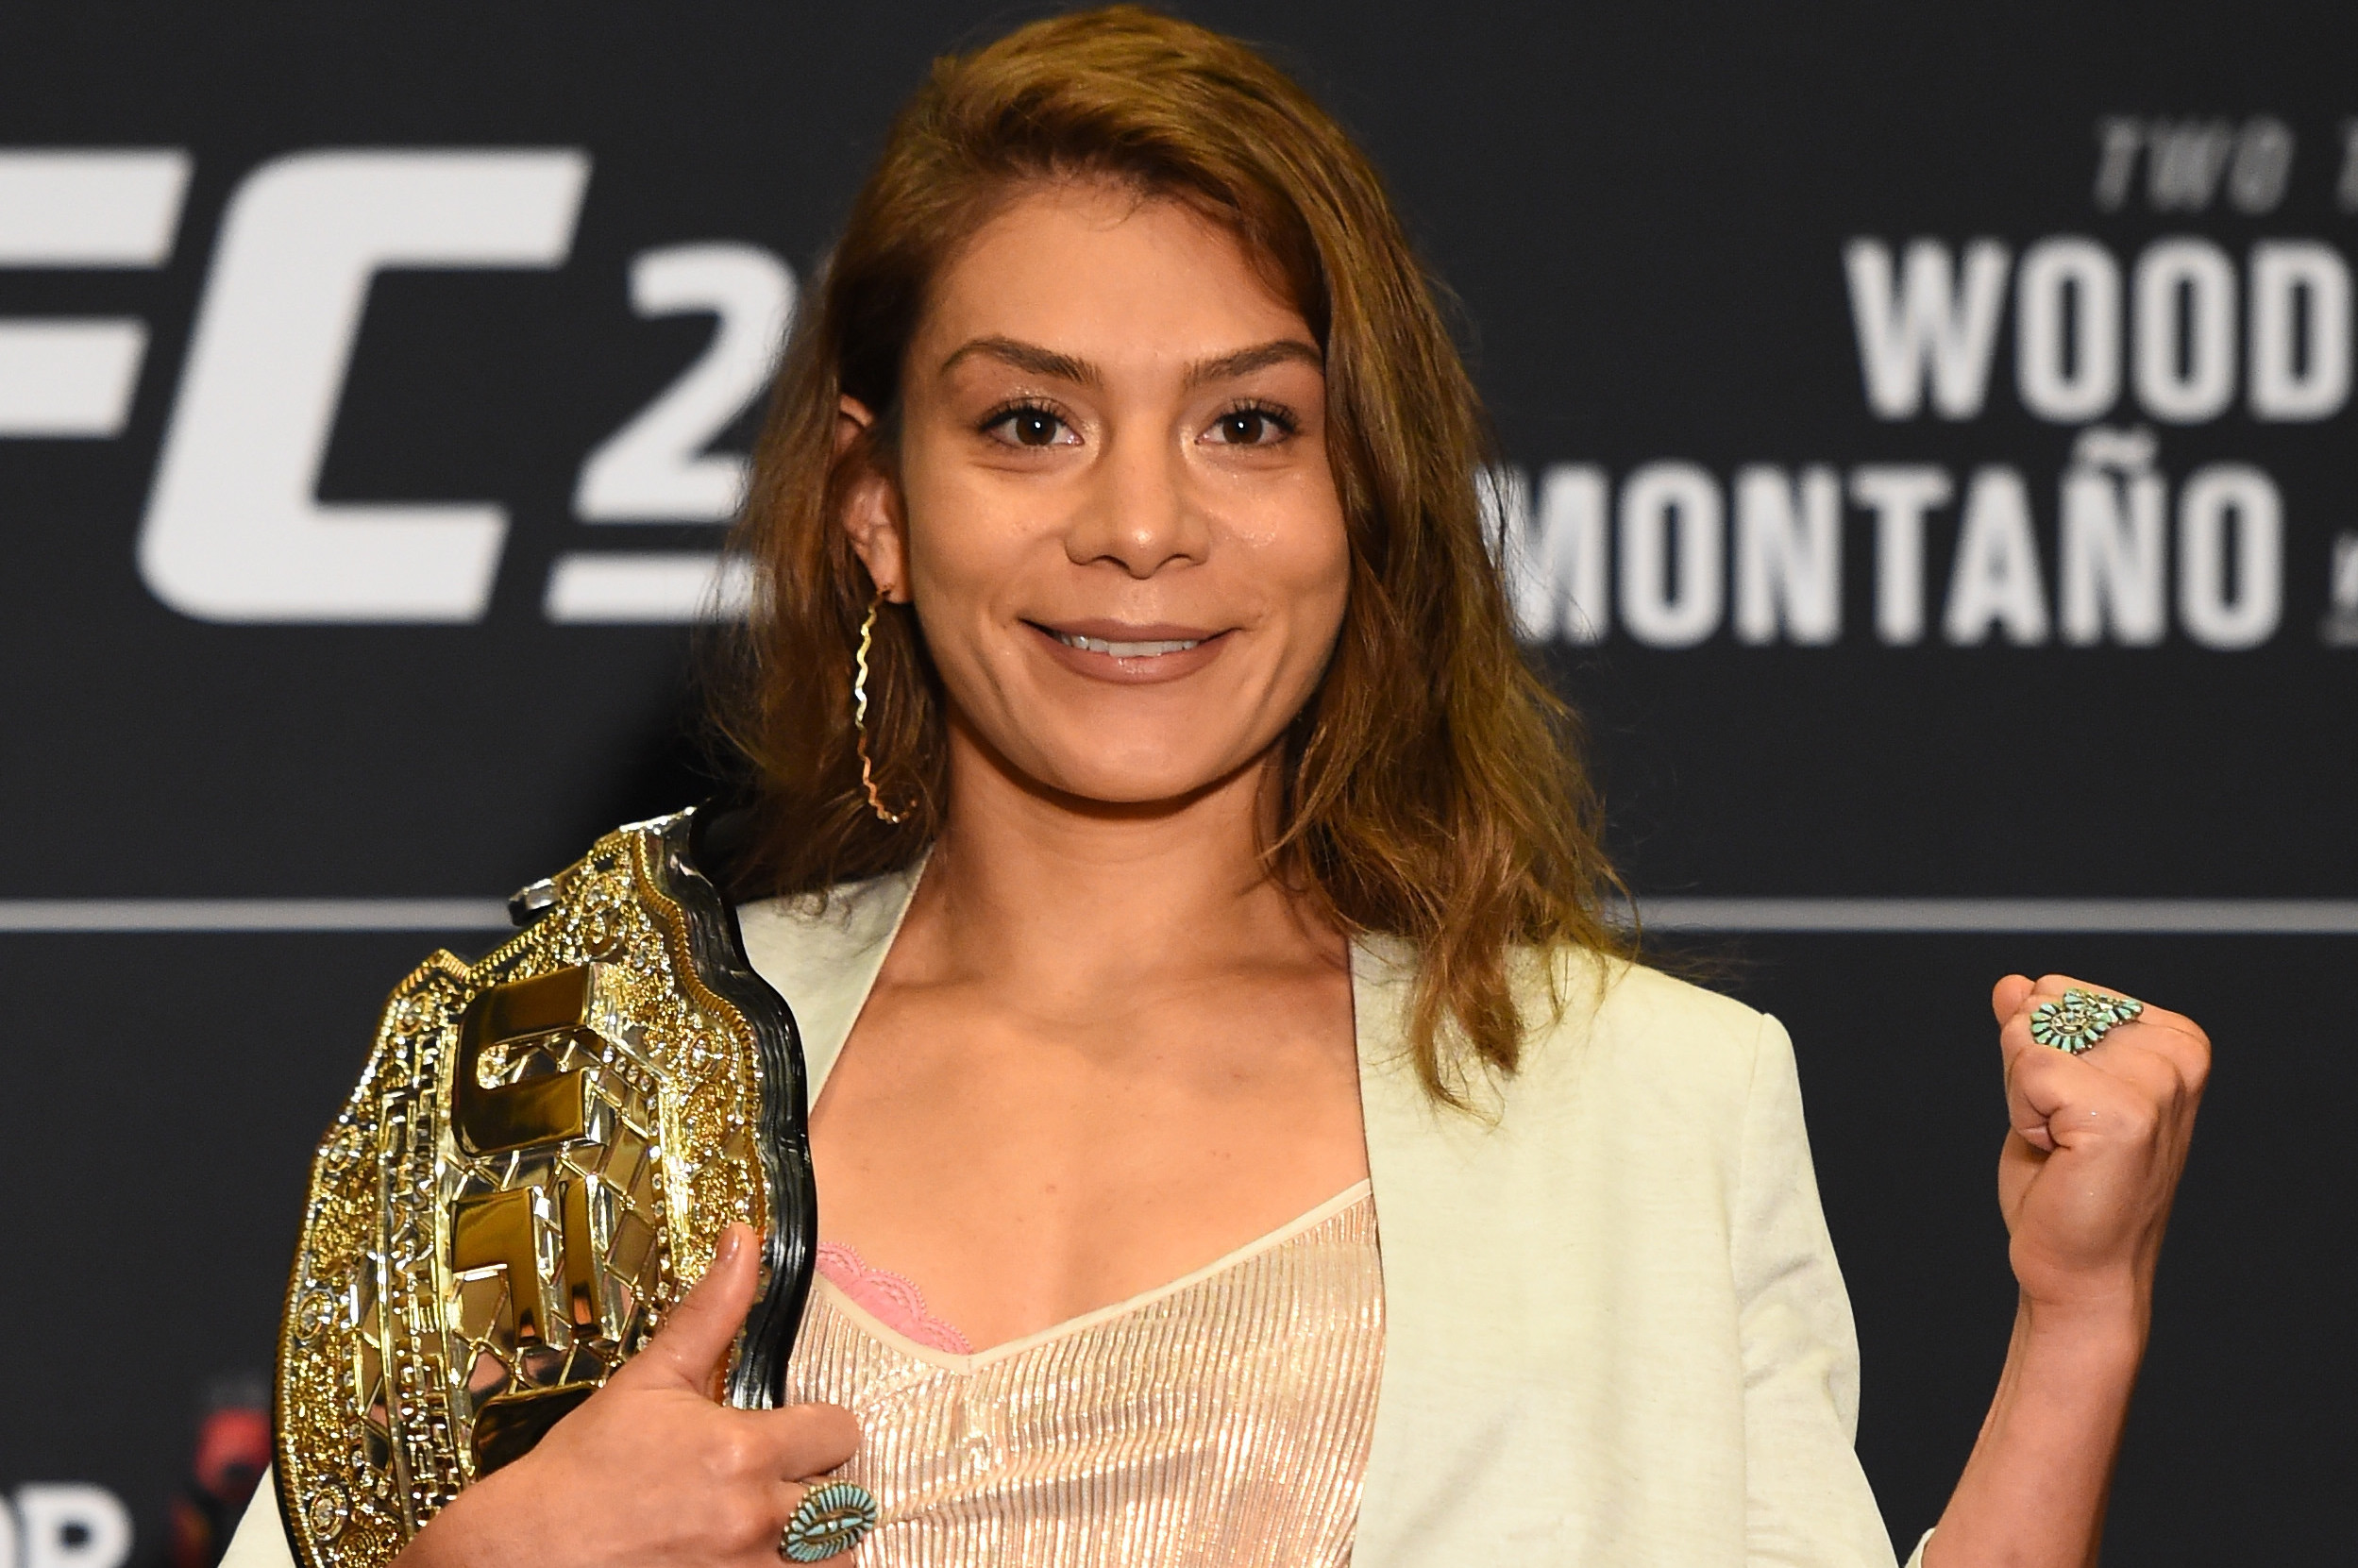 Inside Life Story of Nicco Montano ‘Warrior Spirit’: Biography, Net Worth and more